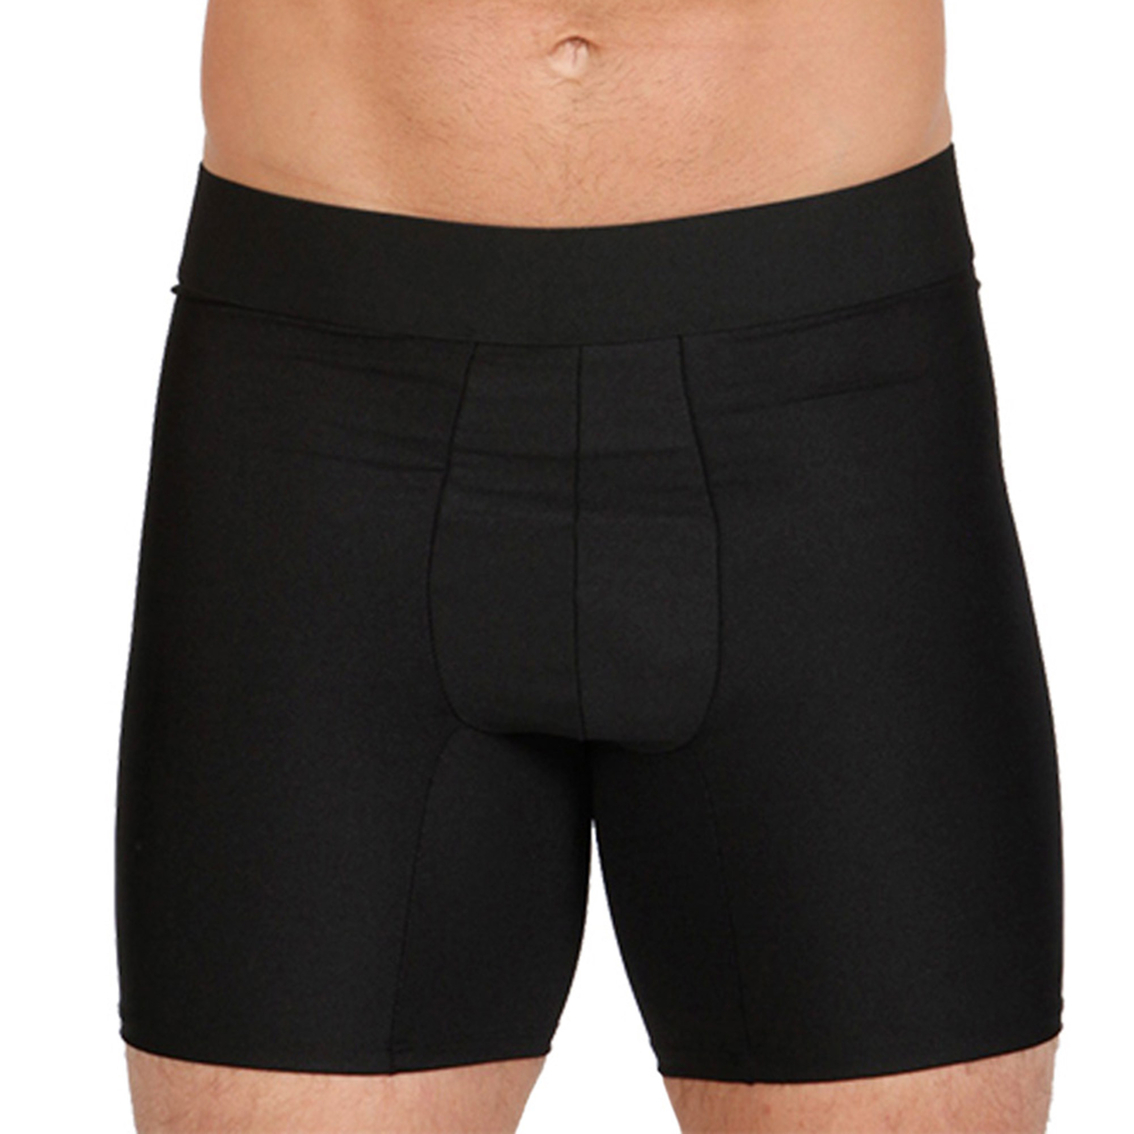 Insta Slim Compression Shorts With Removeable Butt Pads | Shorts ...